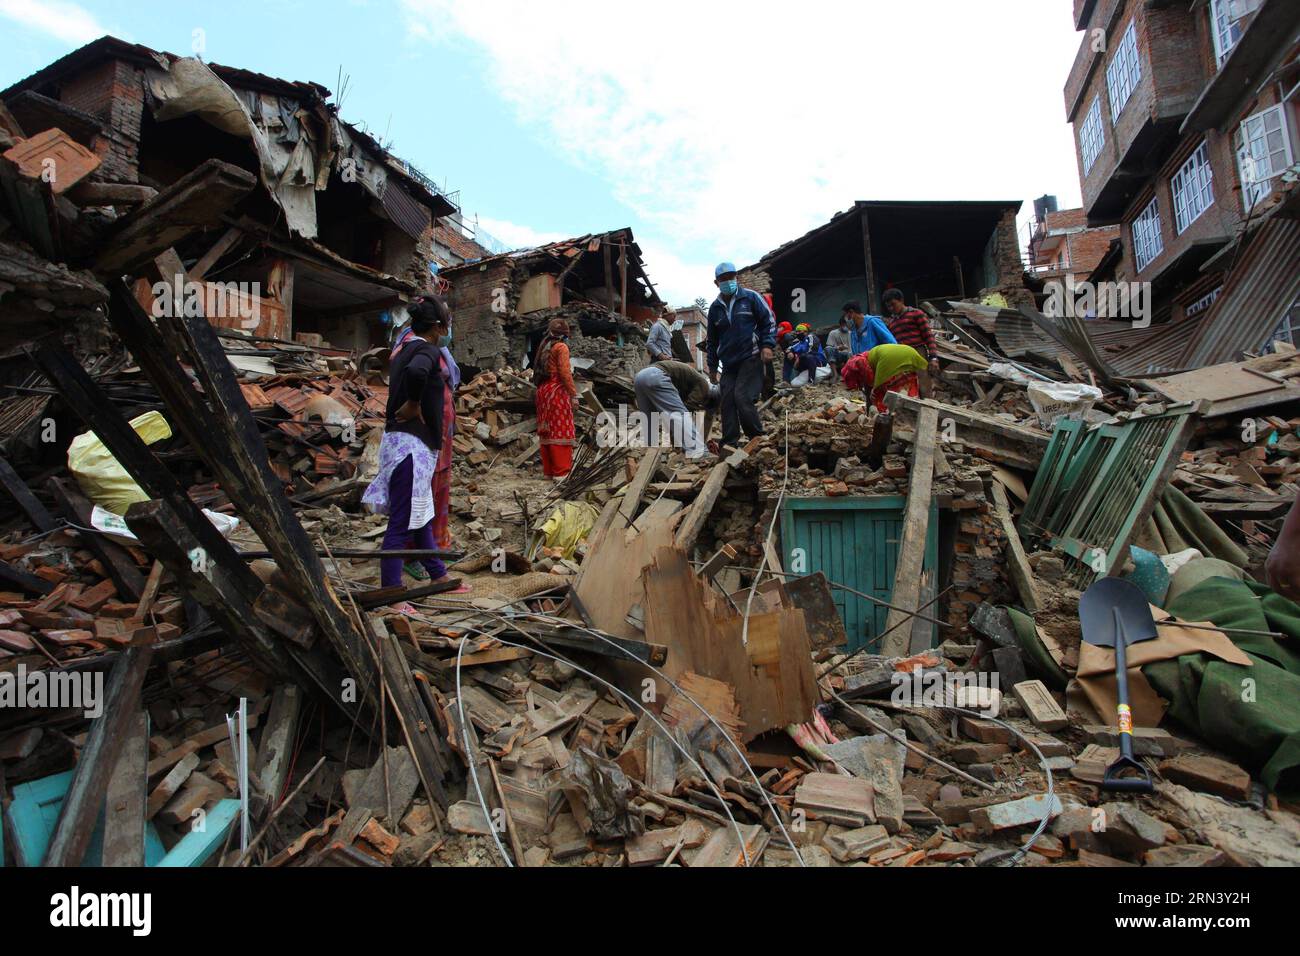 (150429) -- LALITPUR, April 29, 2015 -- People remove the debris after earthquake in Lalitpur, Nepal, April 29, 2015. The 7.9-magnitude quake hit Nepal at midday on Saturday. The death toll from the powerful earthquake has soared to 5,057 and a total of 10,915 others were injured. ) (djj) NEPAL-LALITPUR-EARTHQUAKE-AFTERMATH SunilxSharma PUBLICATIONxNOTxINxCHN   Lalitpur April 29 2015 Celebrities REMOVE The debris After Earthquake in Lalitpur Nepal April 29 2015 The 7 9 magnitude Quake Hit Nepal AT midday ON Saturday The Death toll from The Powerful Earthquake has soared to 5  and a total of 10 Stock Photo